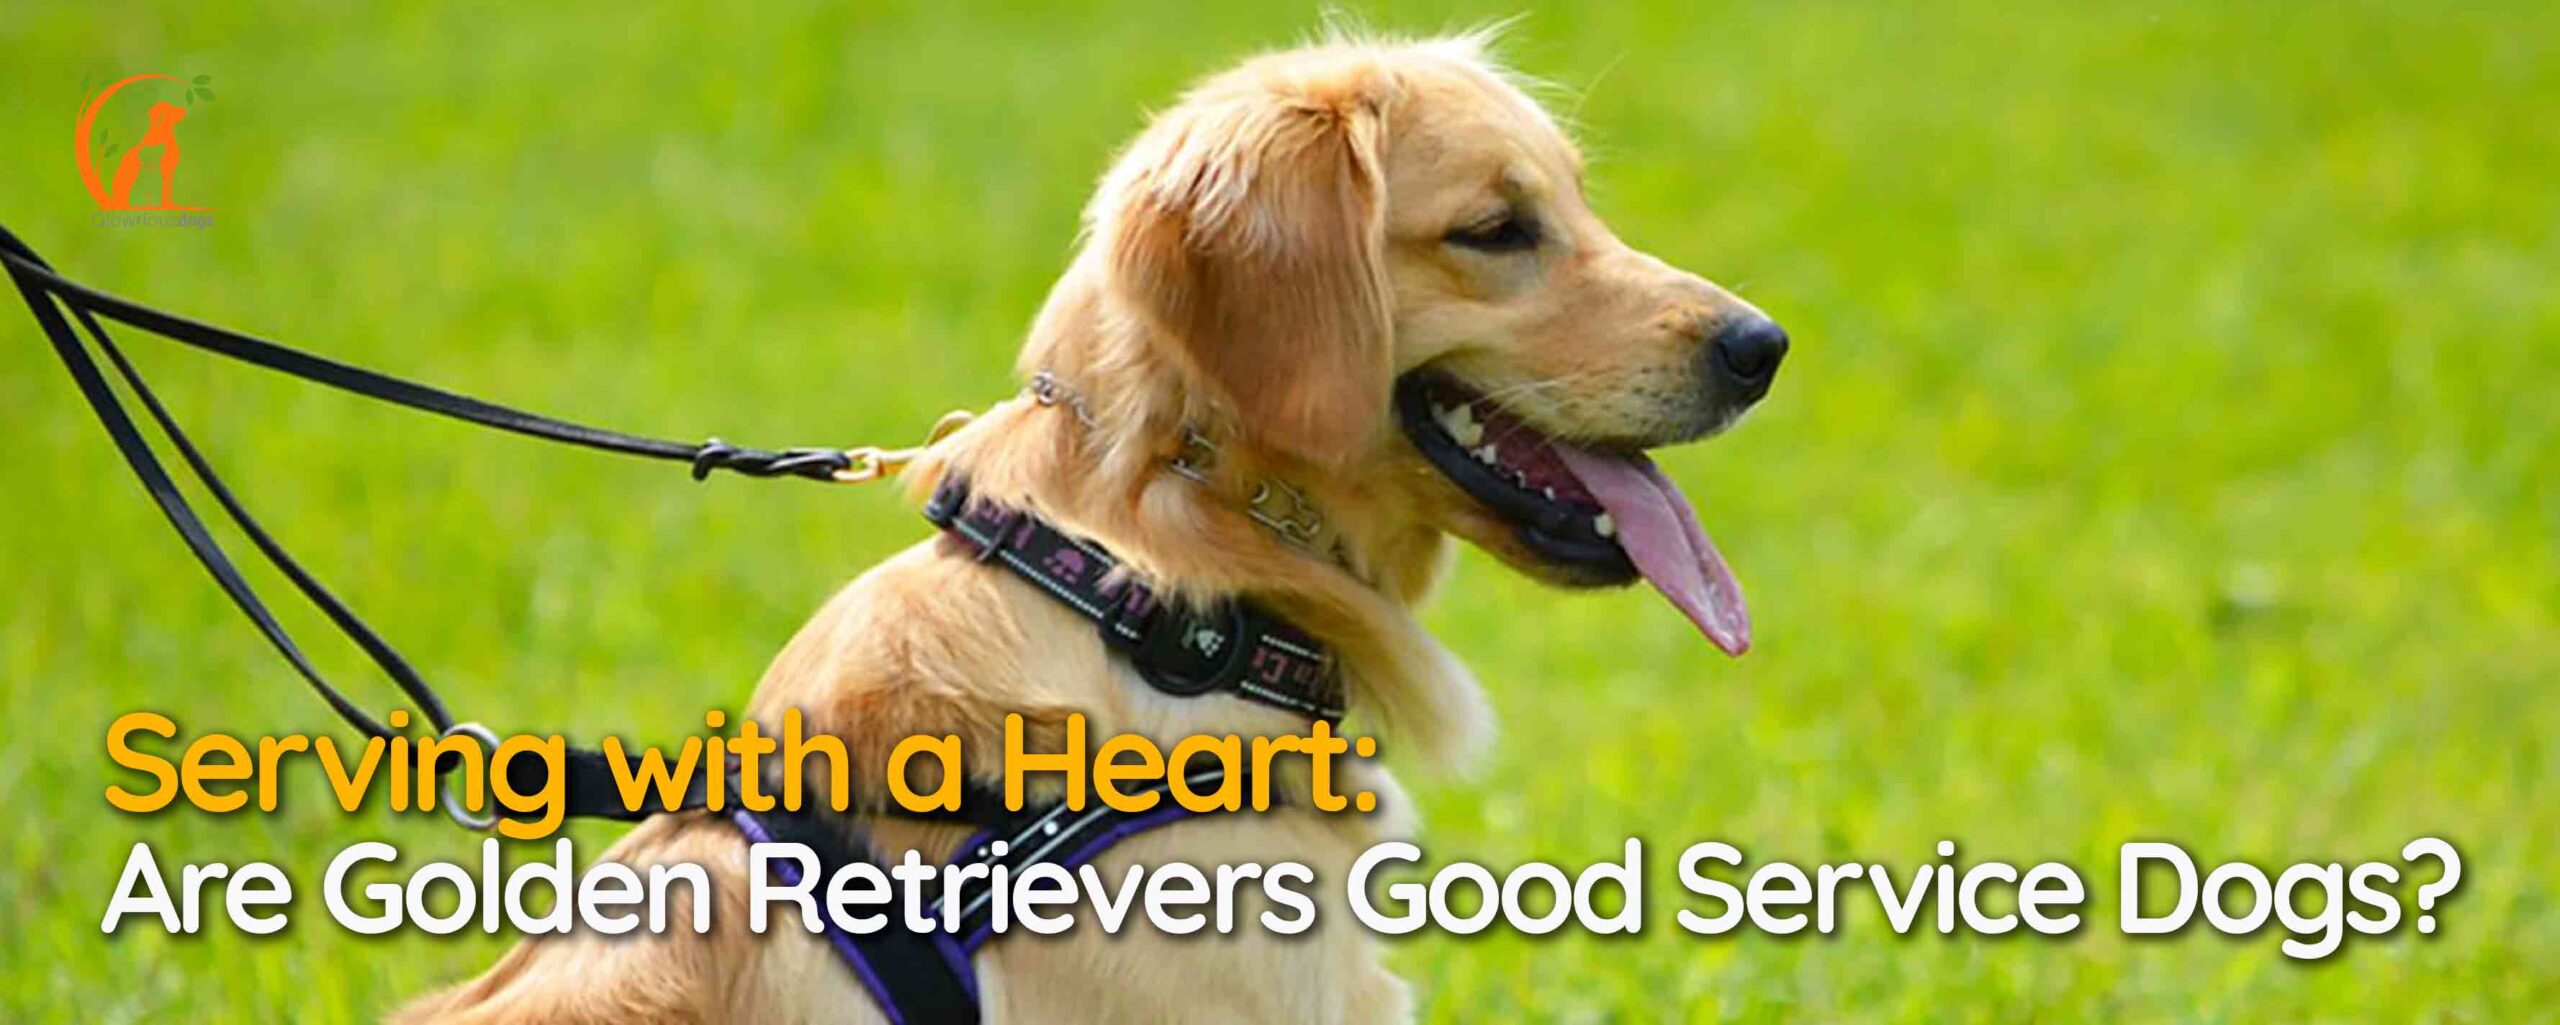 Serving with a Heart: Are Golden Retrievers Good Service Dogs?